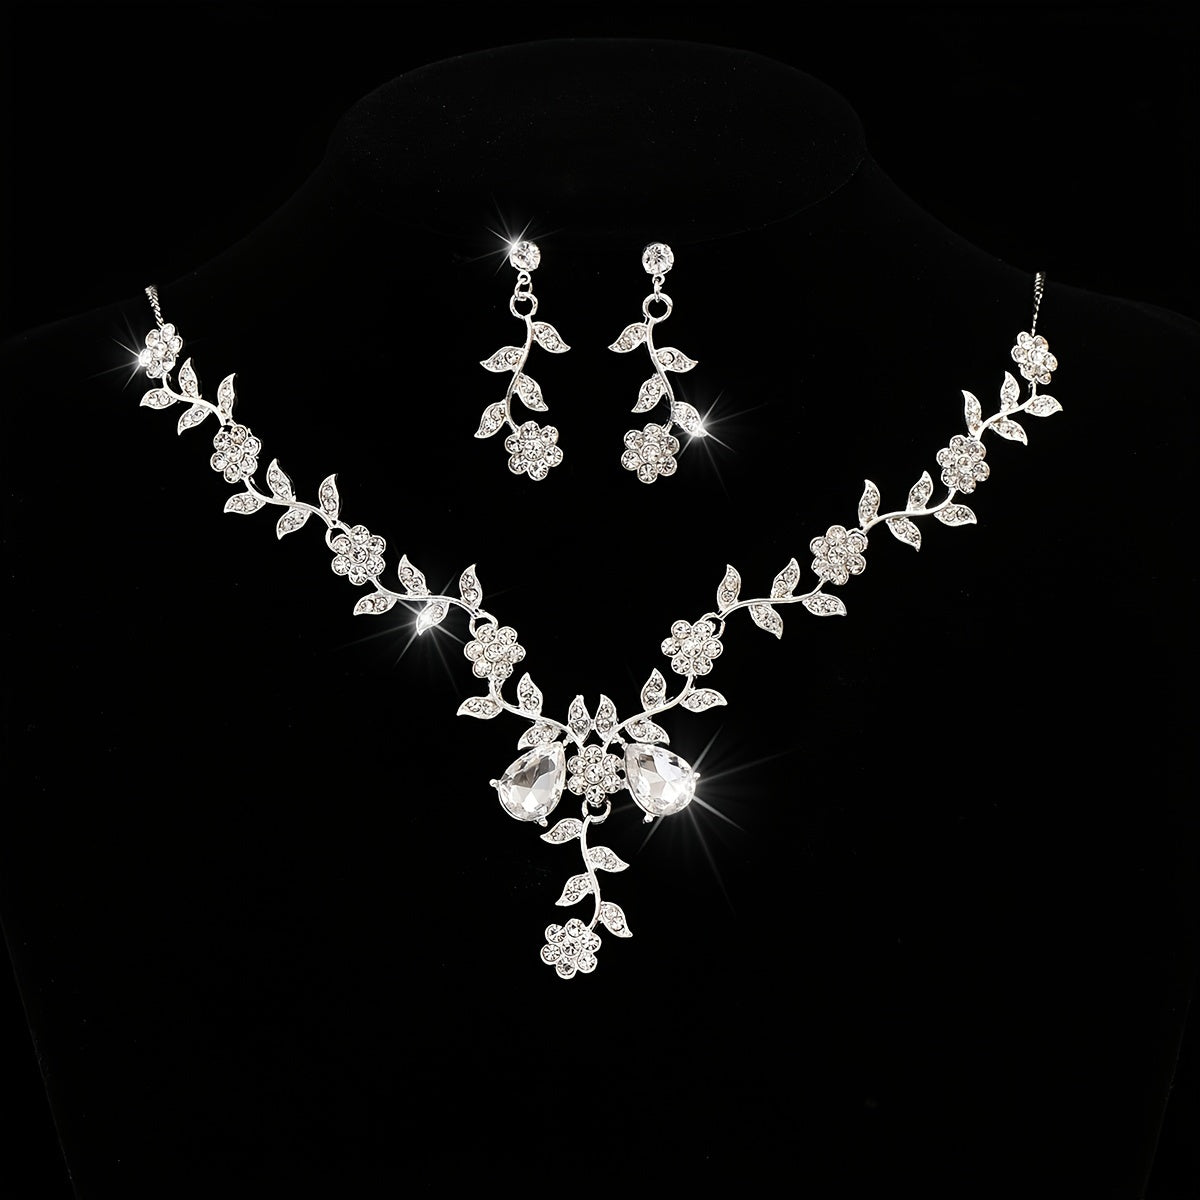 Bride Wedding Jewelry Sets Flower Crystal Bridal Necklace & Earrings Set Leaf Shape Prom Costume Jewelry Set Rhinestone Pendant Necklace For Women And Girls Xmas Gift